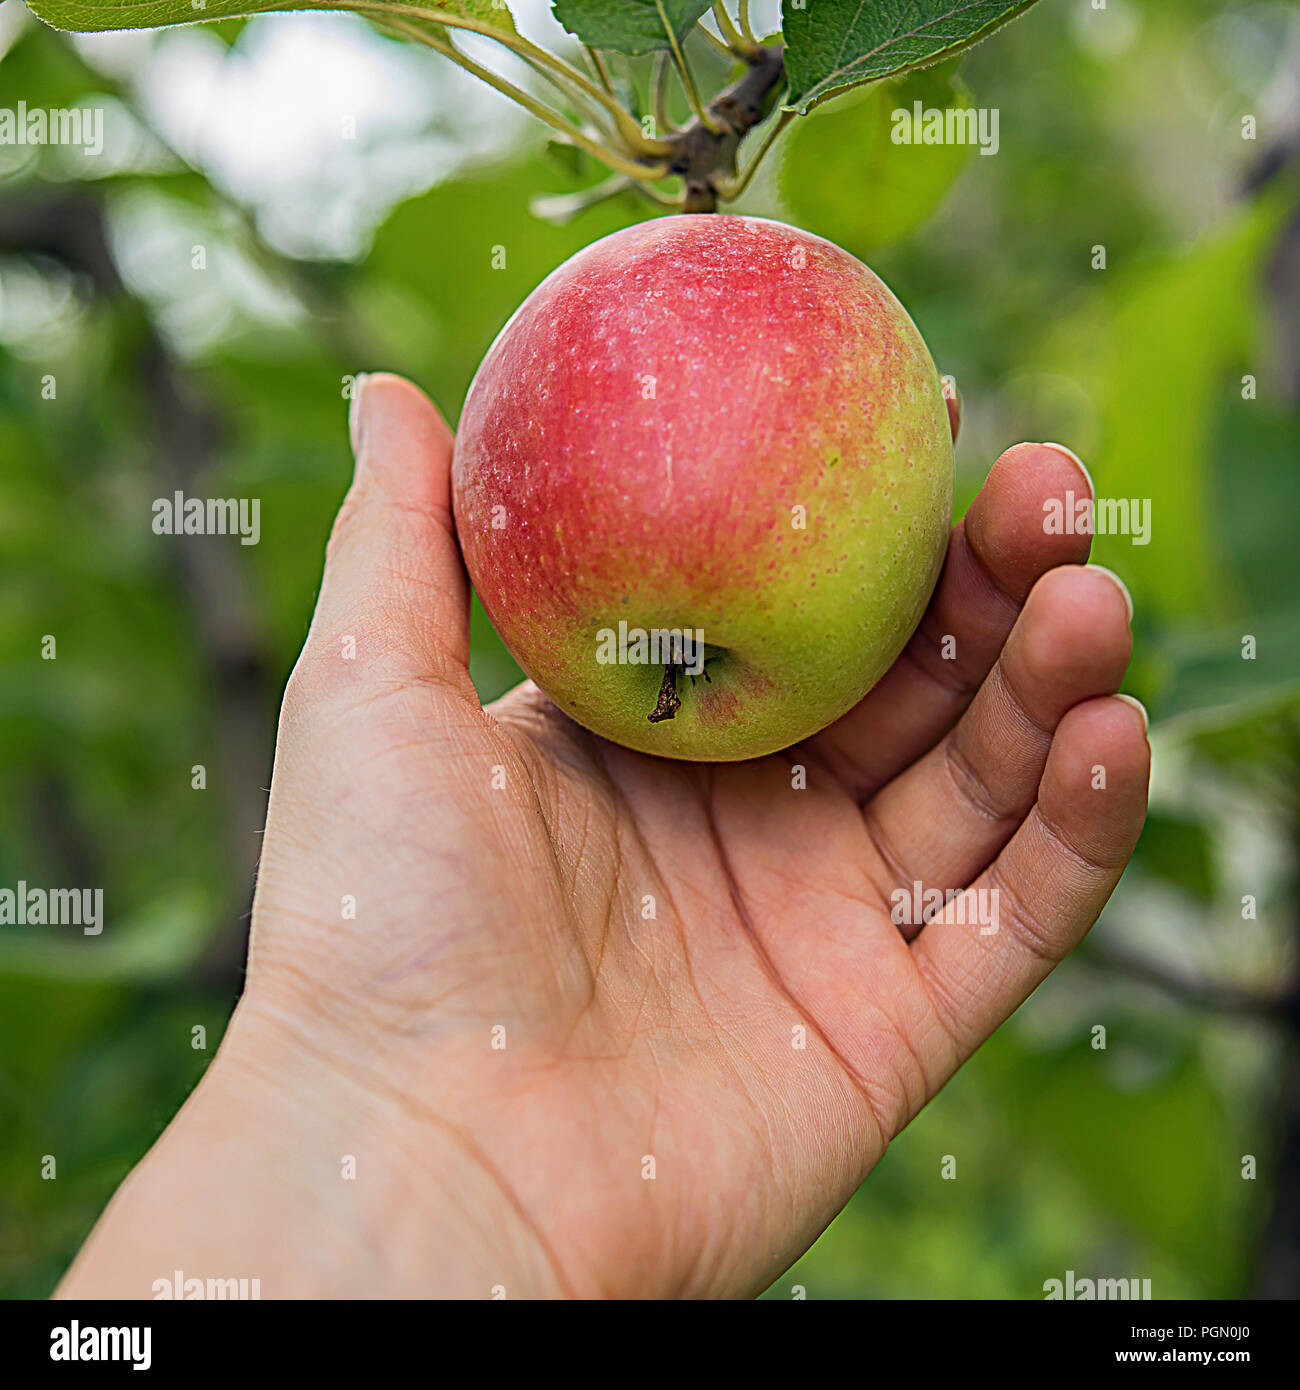 Square image of farmer's hand holding fresh red side apple. Sweet fruit is surrounded by leaves and tree branches. Autumn or summer harvest time and h Stock Photo